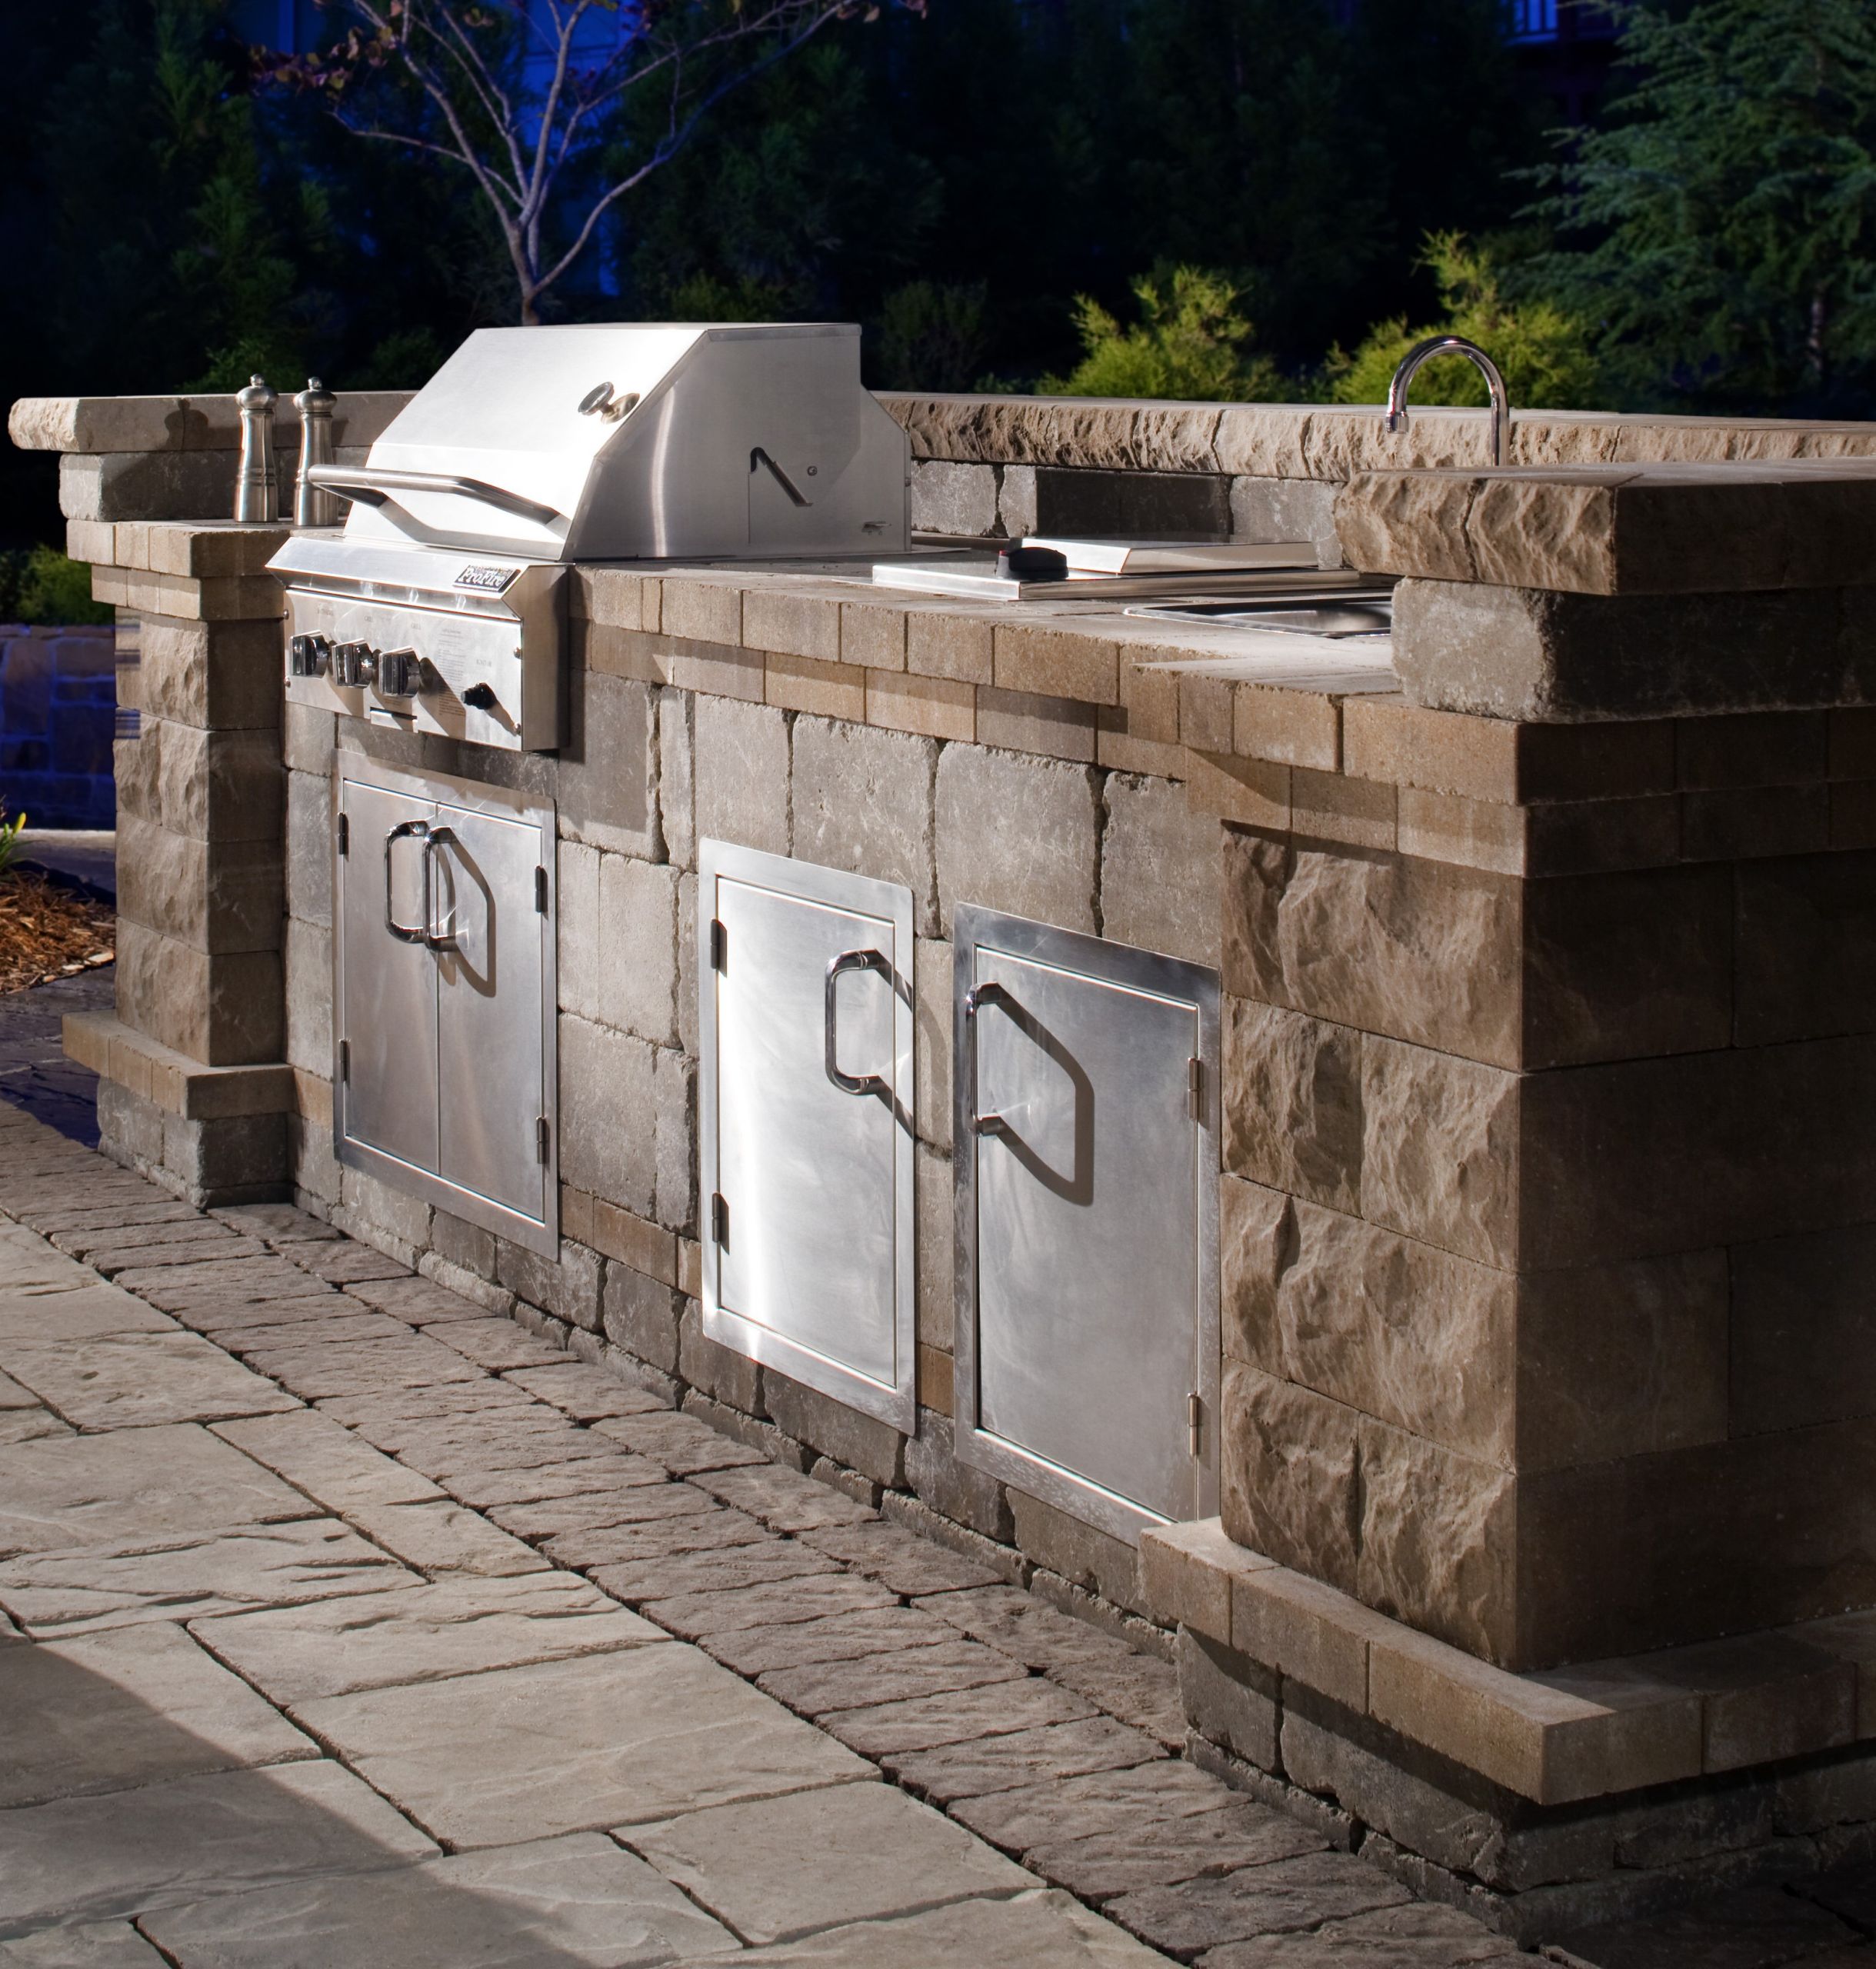 Belgard Outdoor Kitchen
 Outdoor Kitchens Archives Page 3 of 4 Outdoor Living